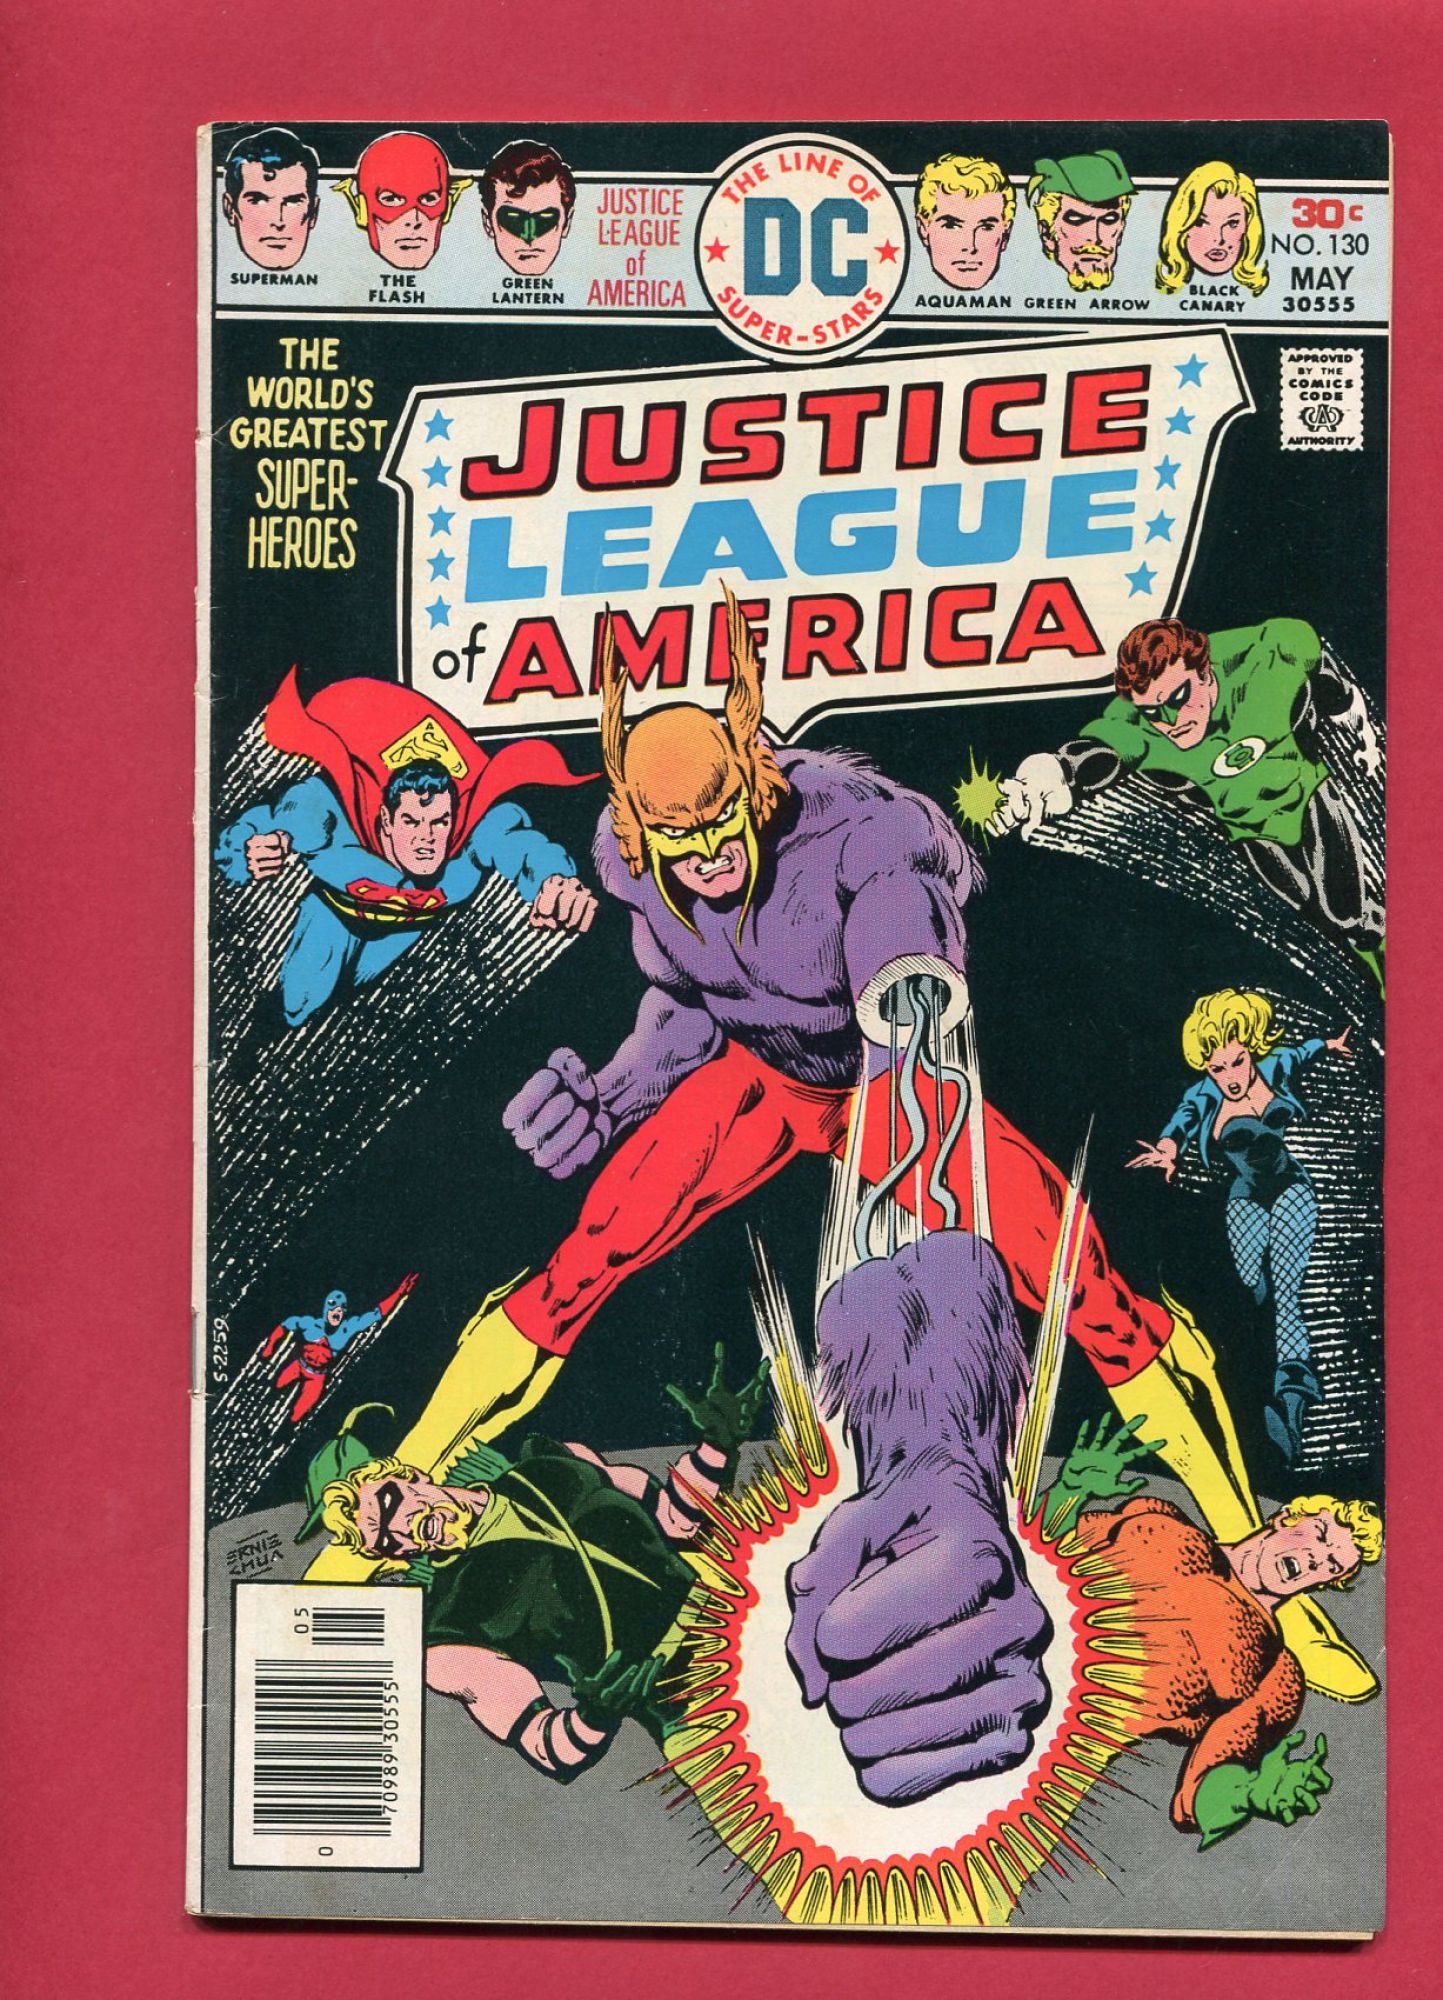 Justice League of America #130, May 1976, 6.0 FN